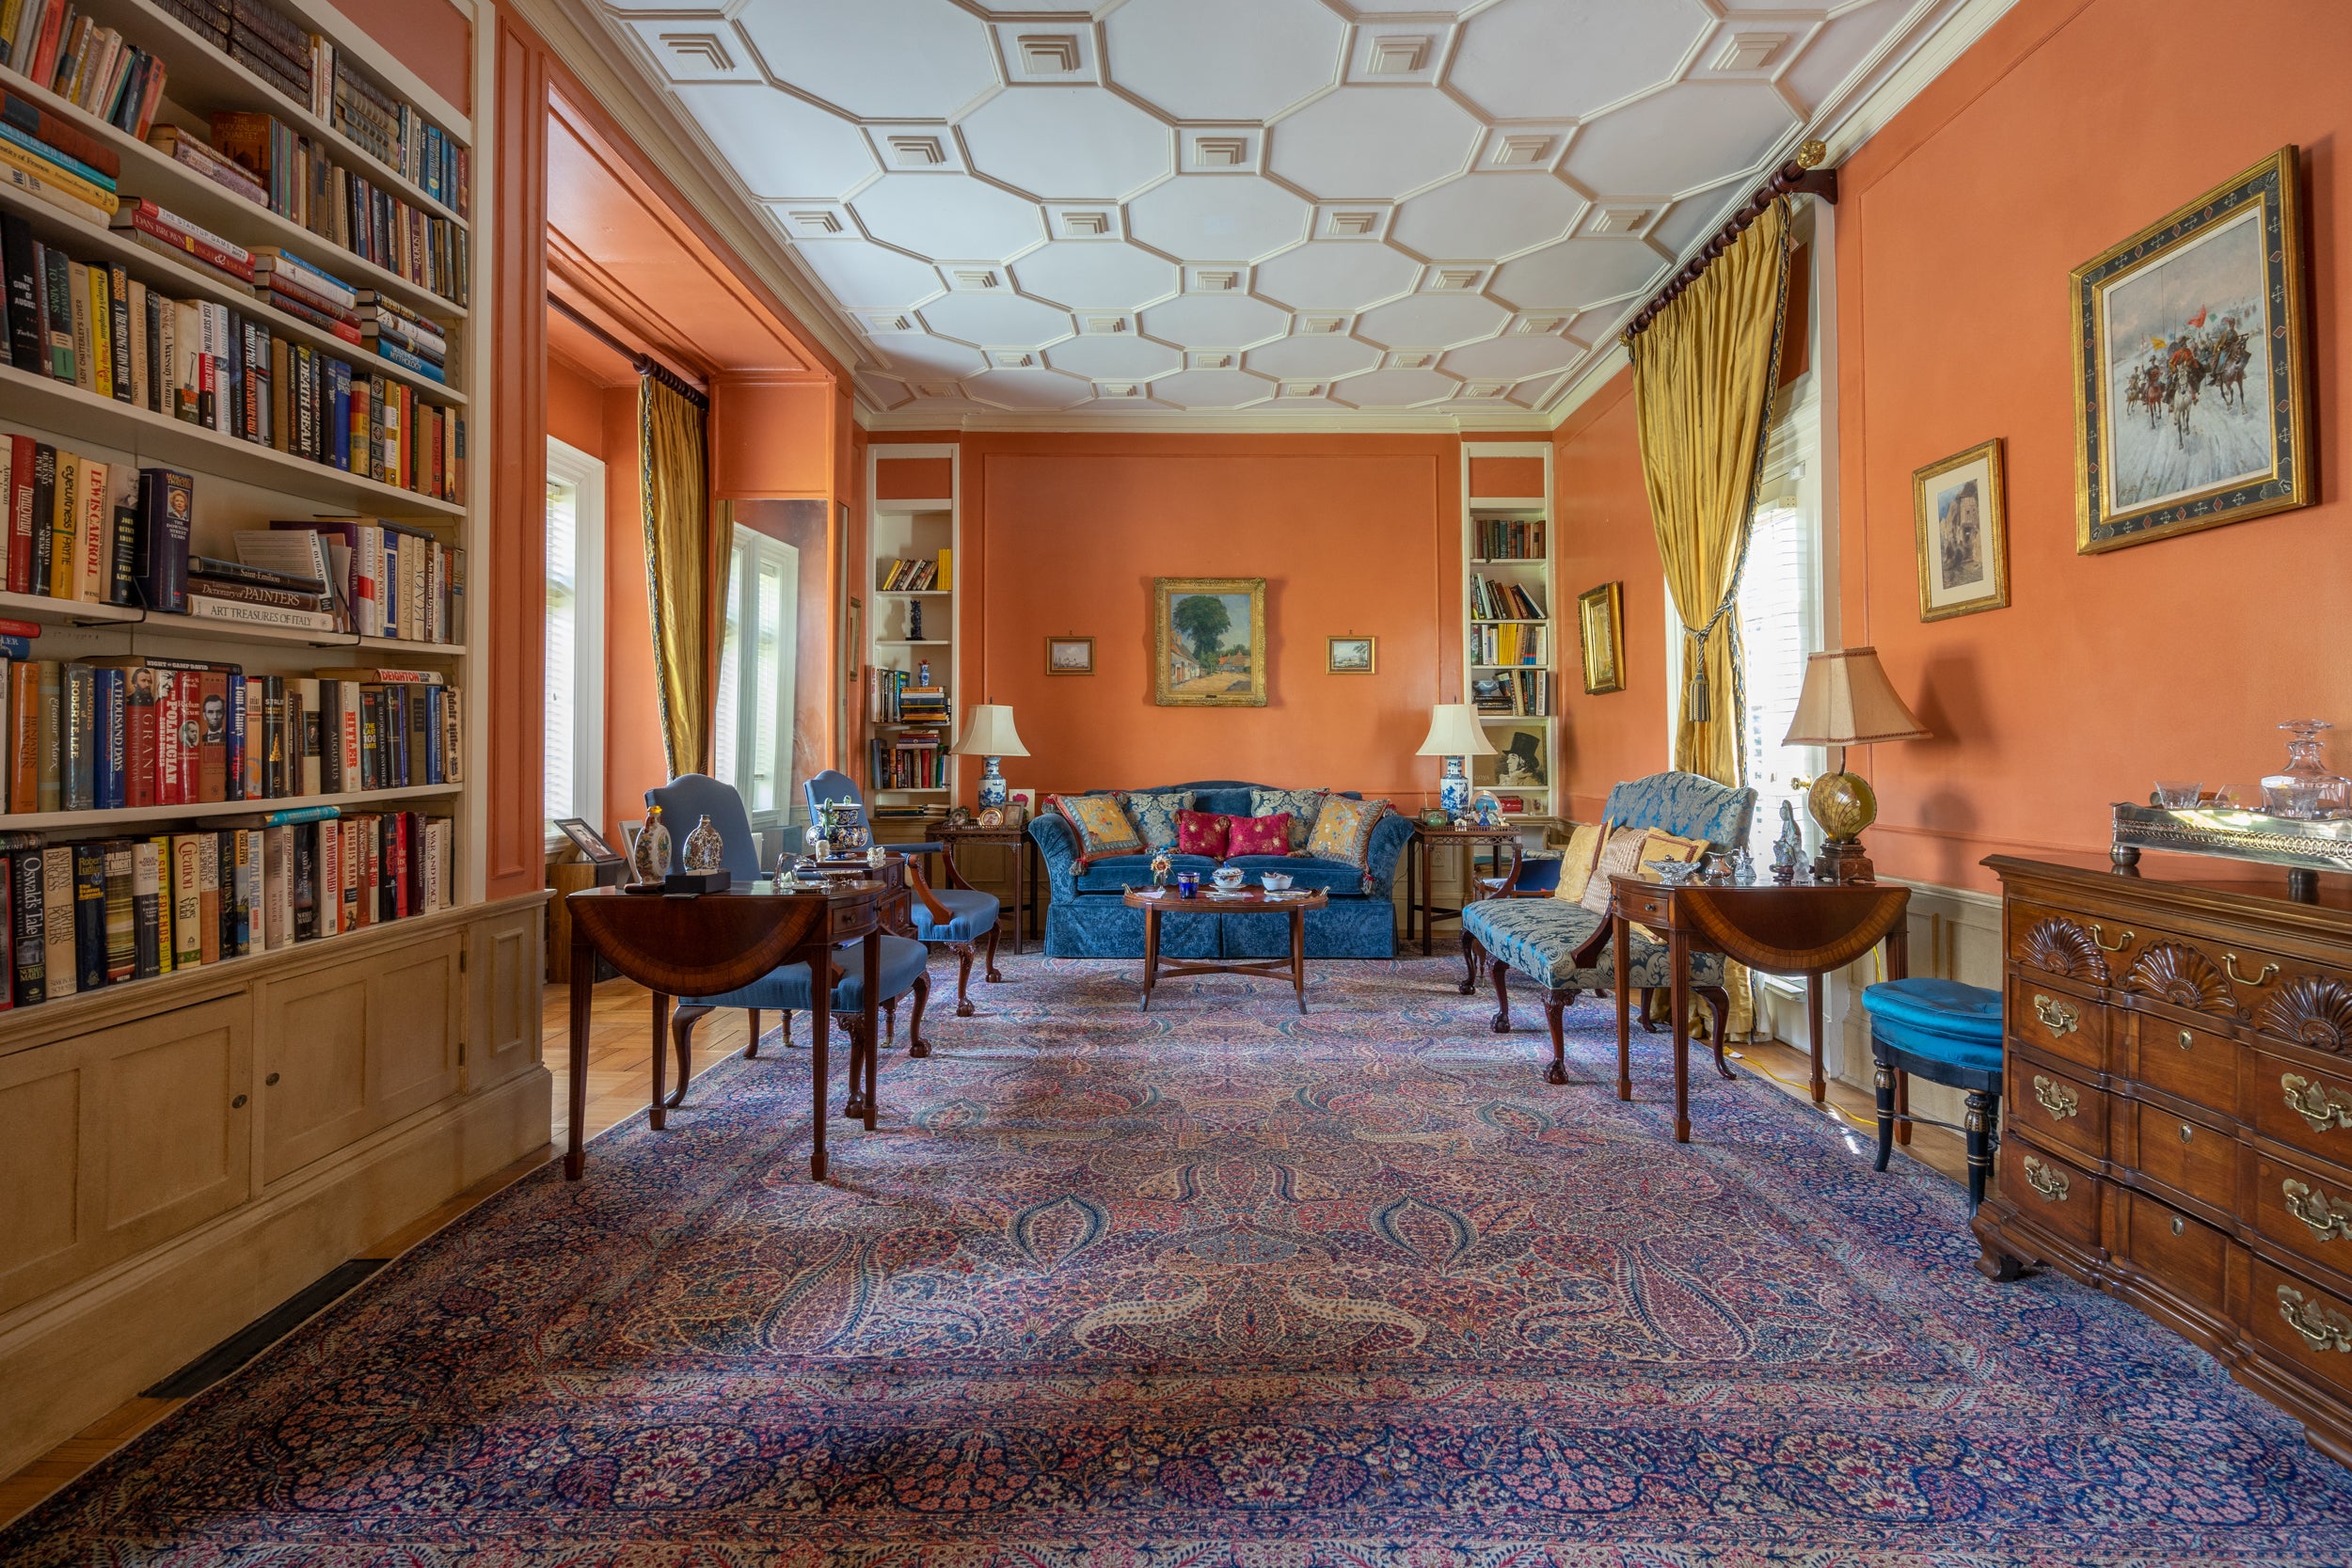 The library has intricate ceiling moulding and orange walls, picture windows, and built-in bookshelves.